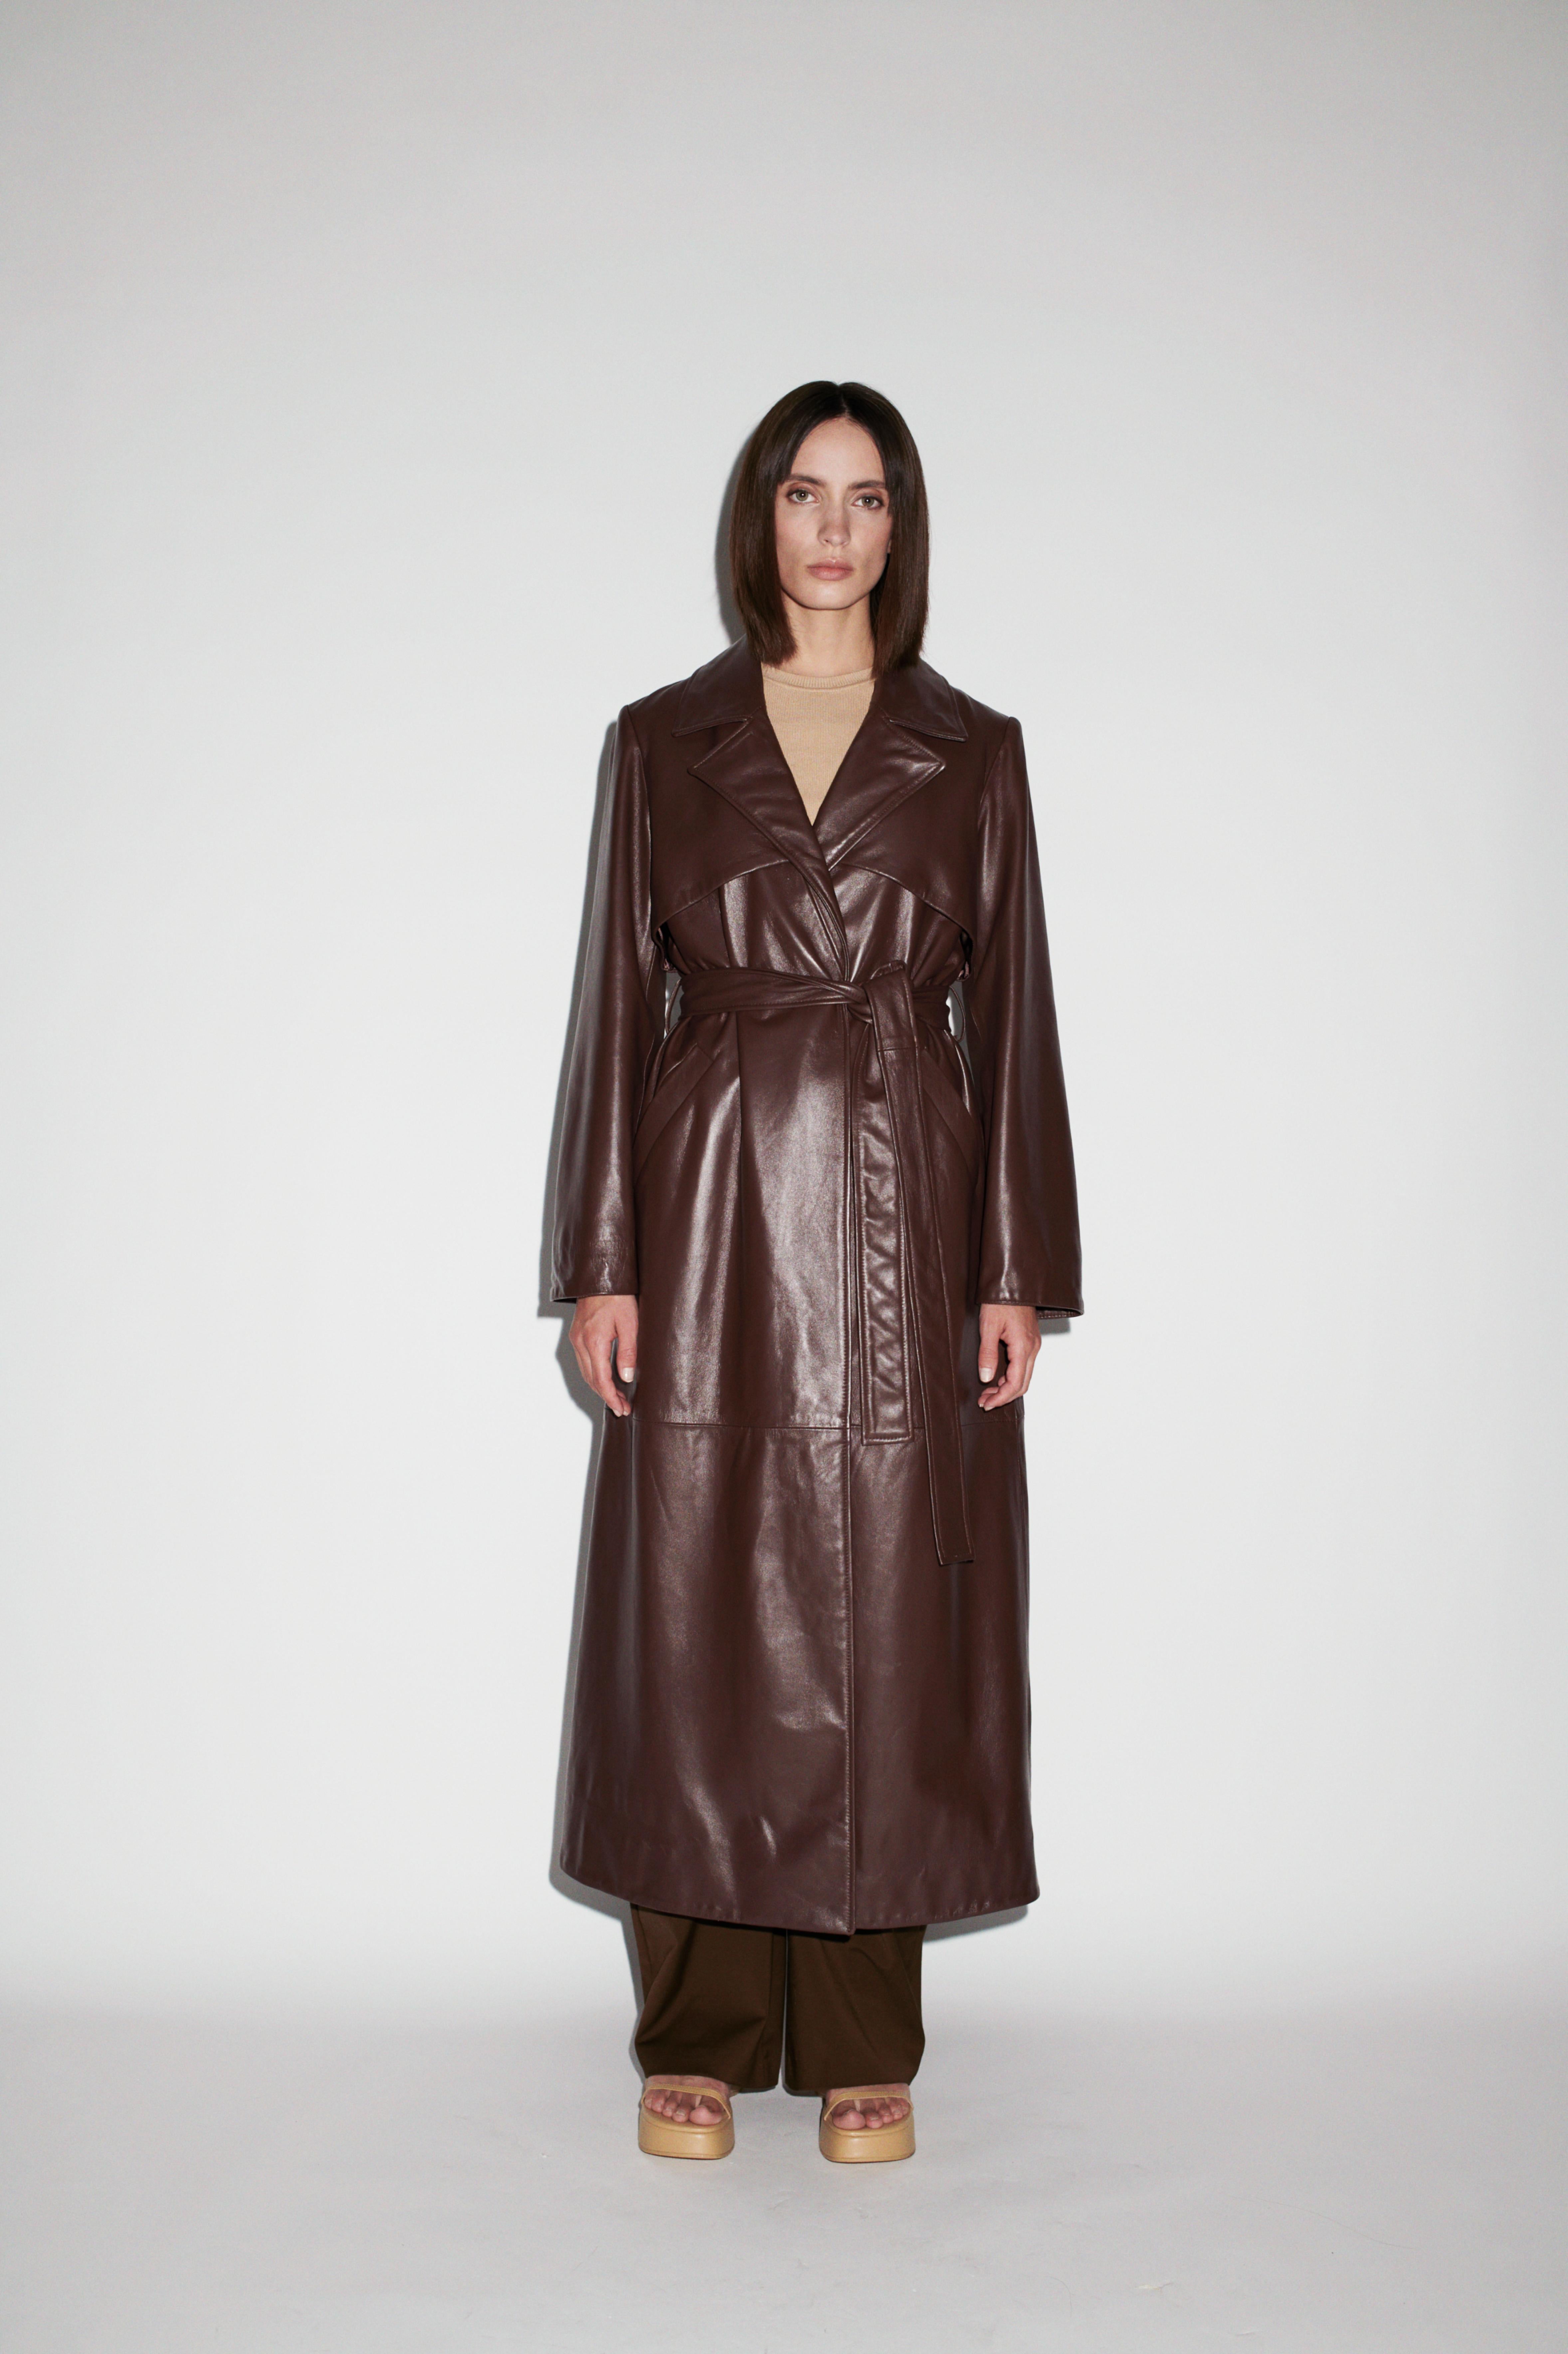 Verheyen London Leather Trench Coat in Black - Size uk 6

Handmade in London, made with 100% Italian Lambs Leather this luxury item is an investment piece to wear for a lifetime.  This piece is made by artisans in London, expert artisans who make